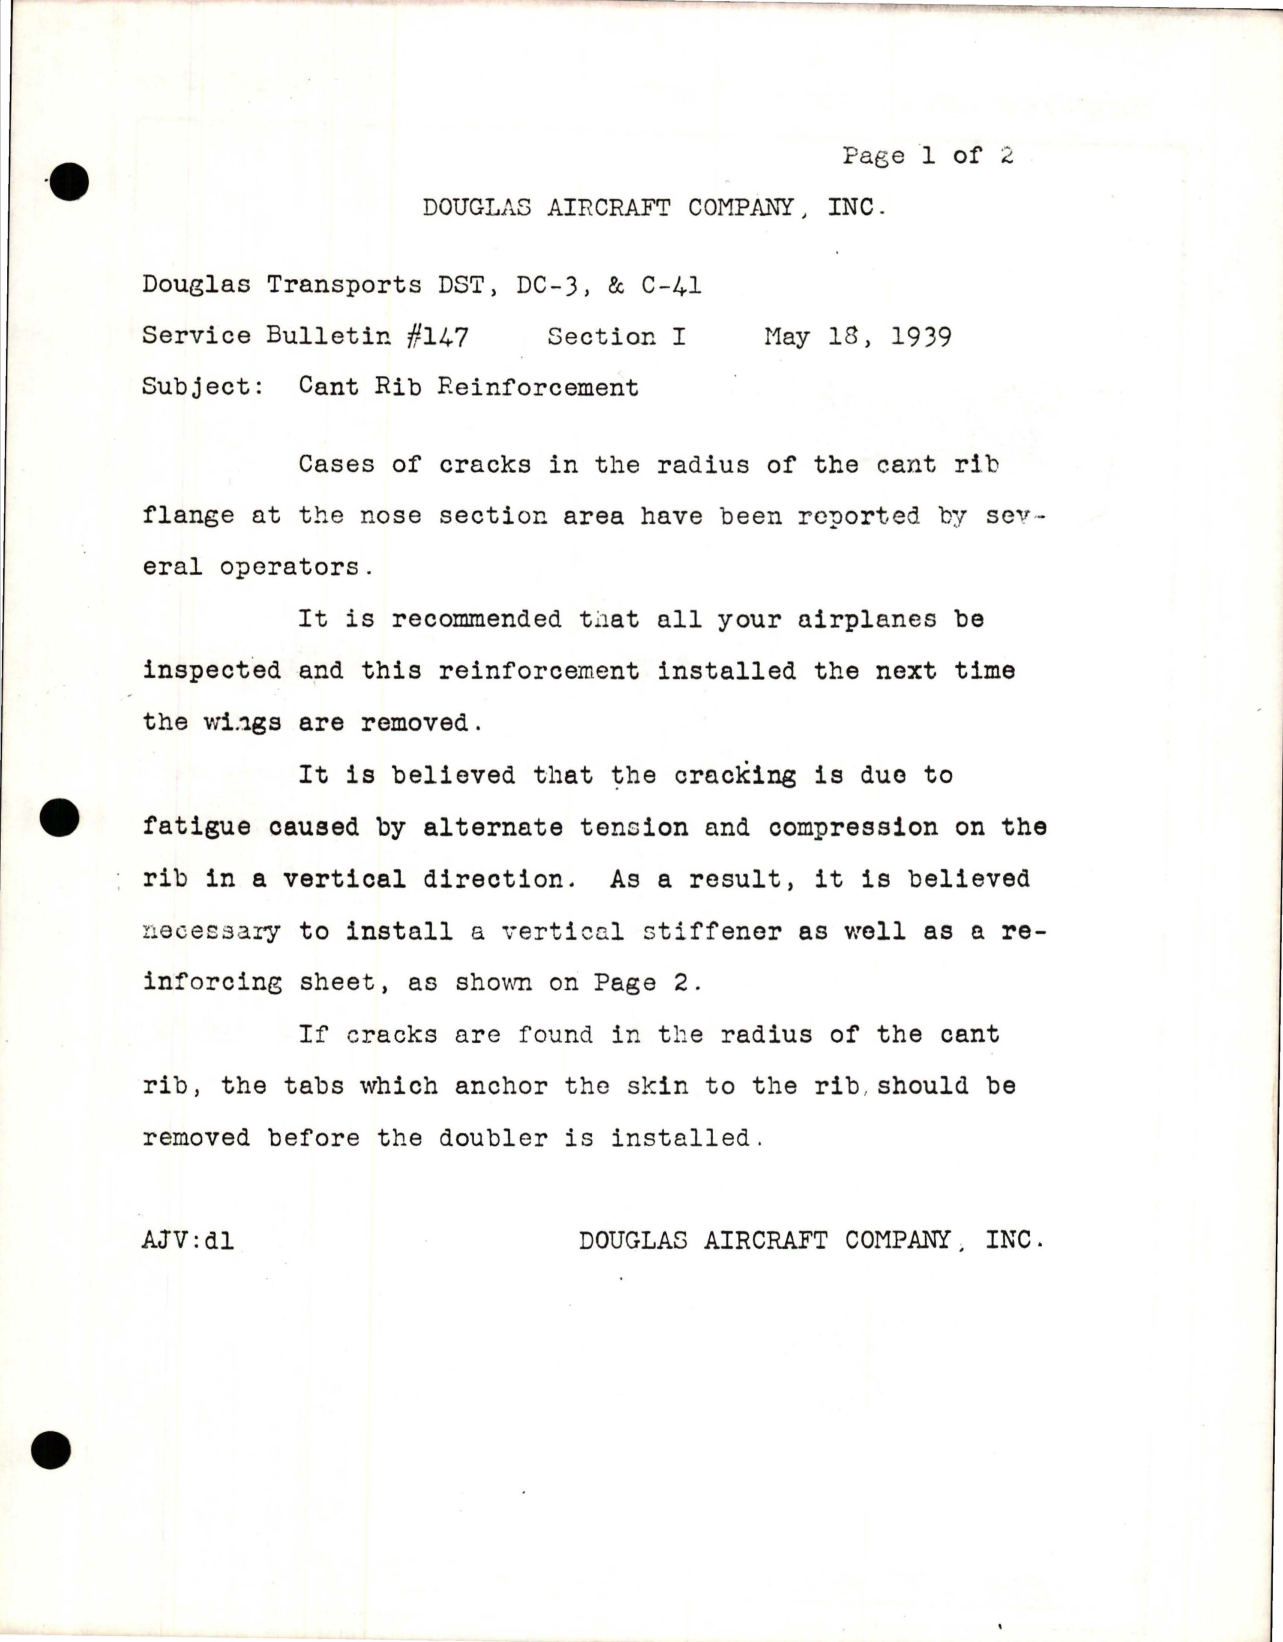 Sample page 1 from AirCorps Library document: Cant Rib Reinforcement